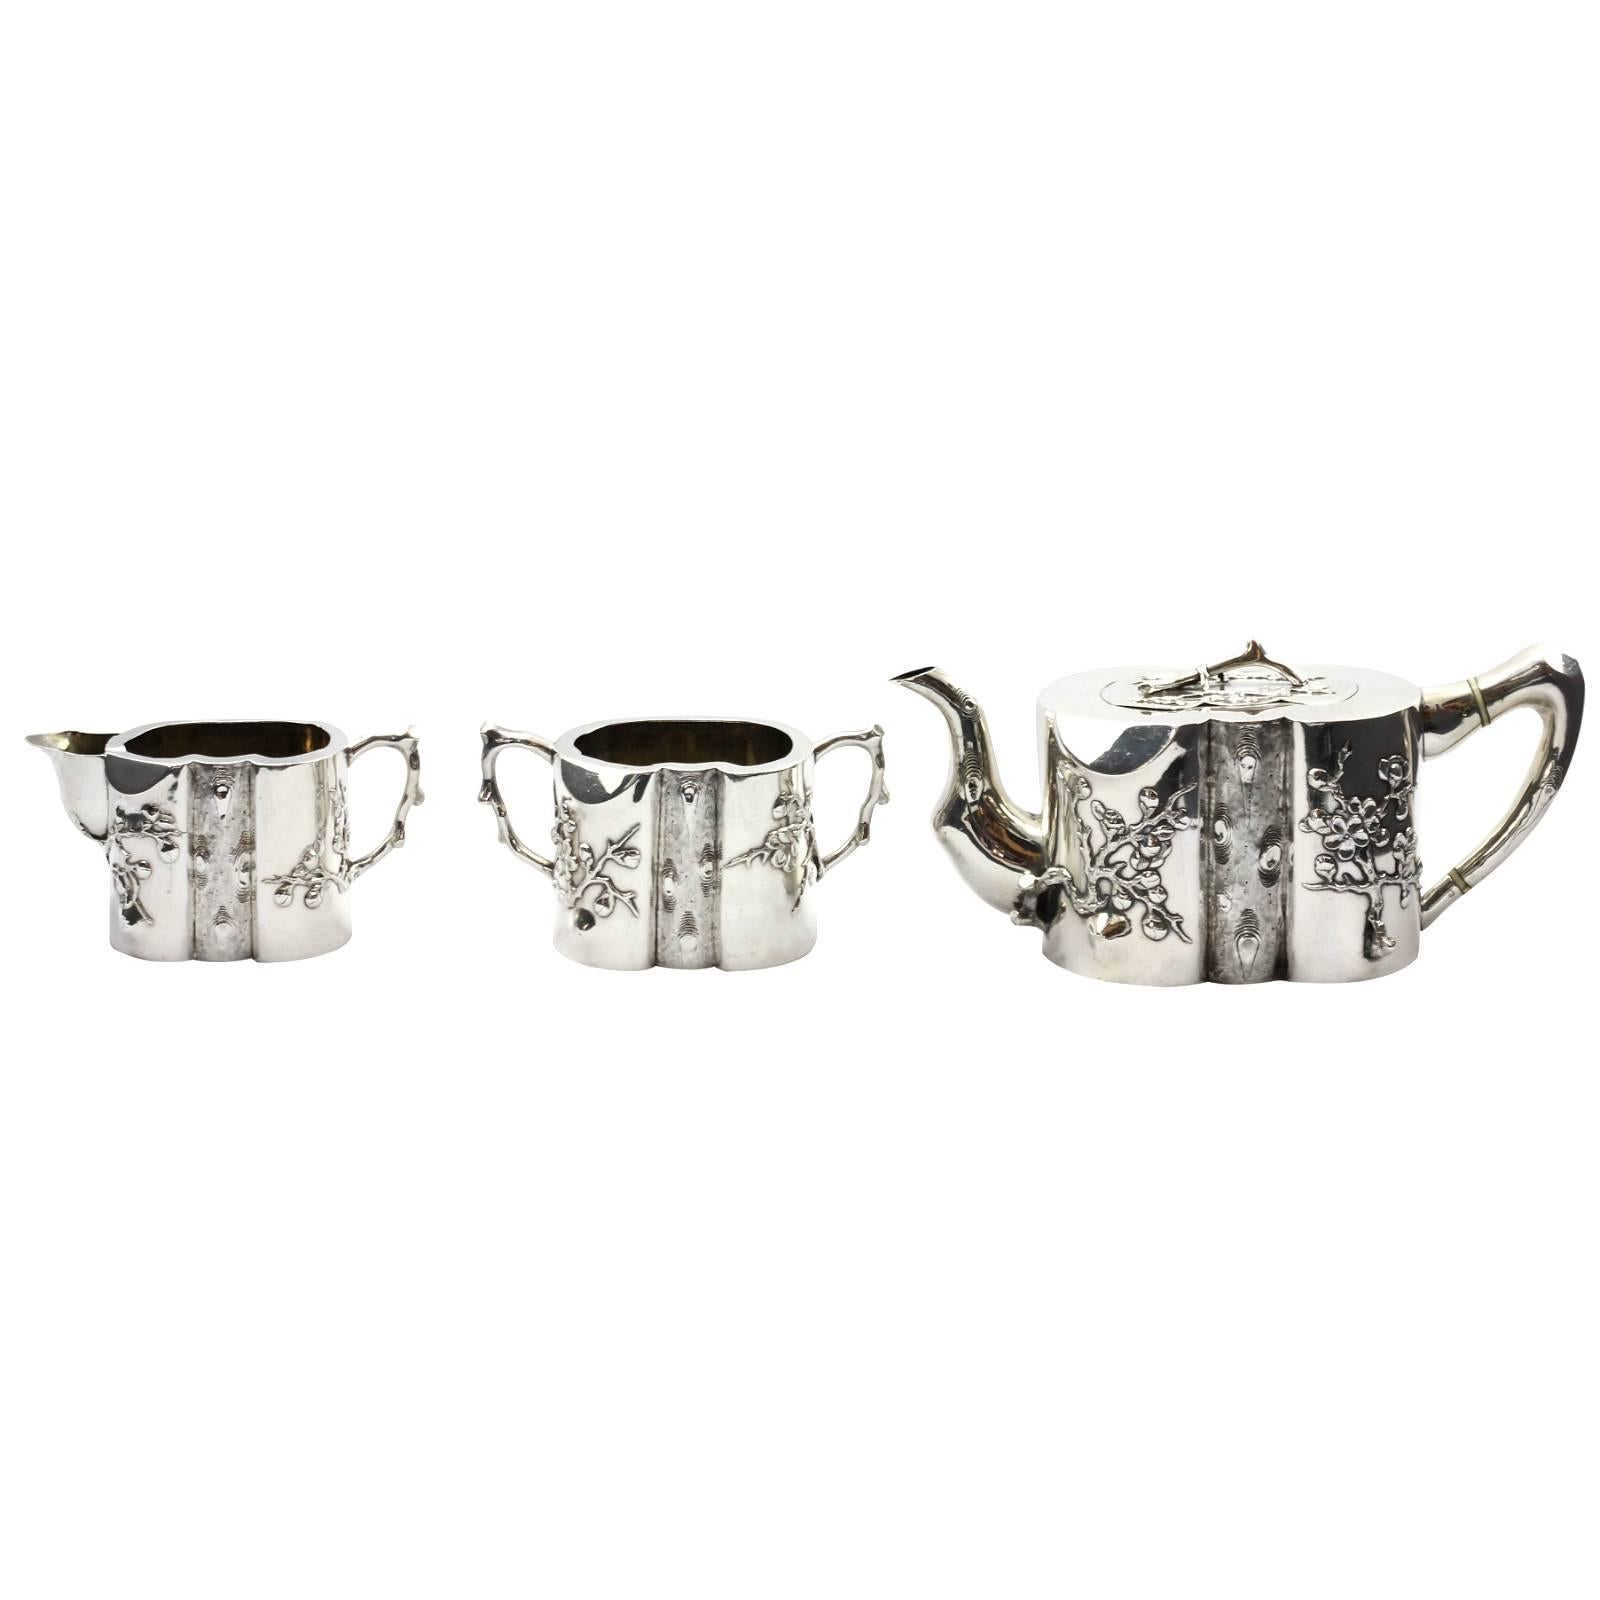 A late 19th three-piece Chinese export coin silver tea service by Hong Kong retail silversmiths, Wang Hing. The piece features a heavy prunus motif, with the centre of each piece representing the grain, whilst the spout and handle represent the